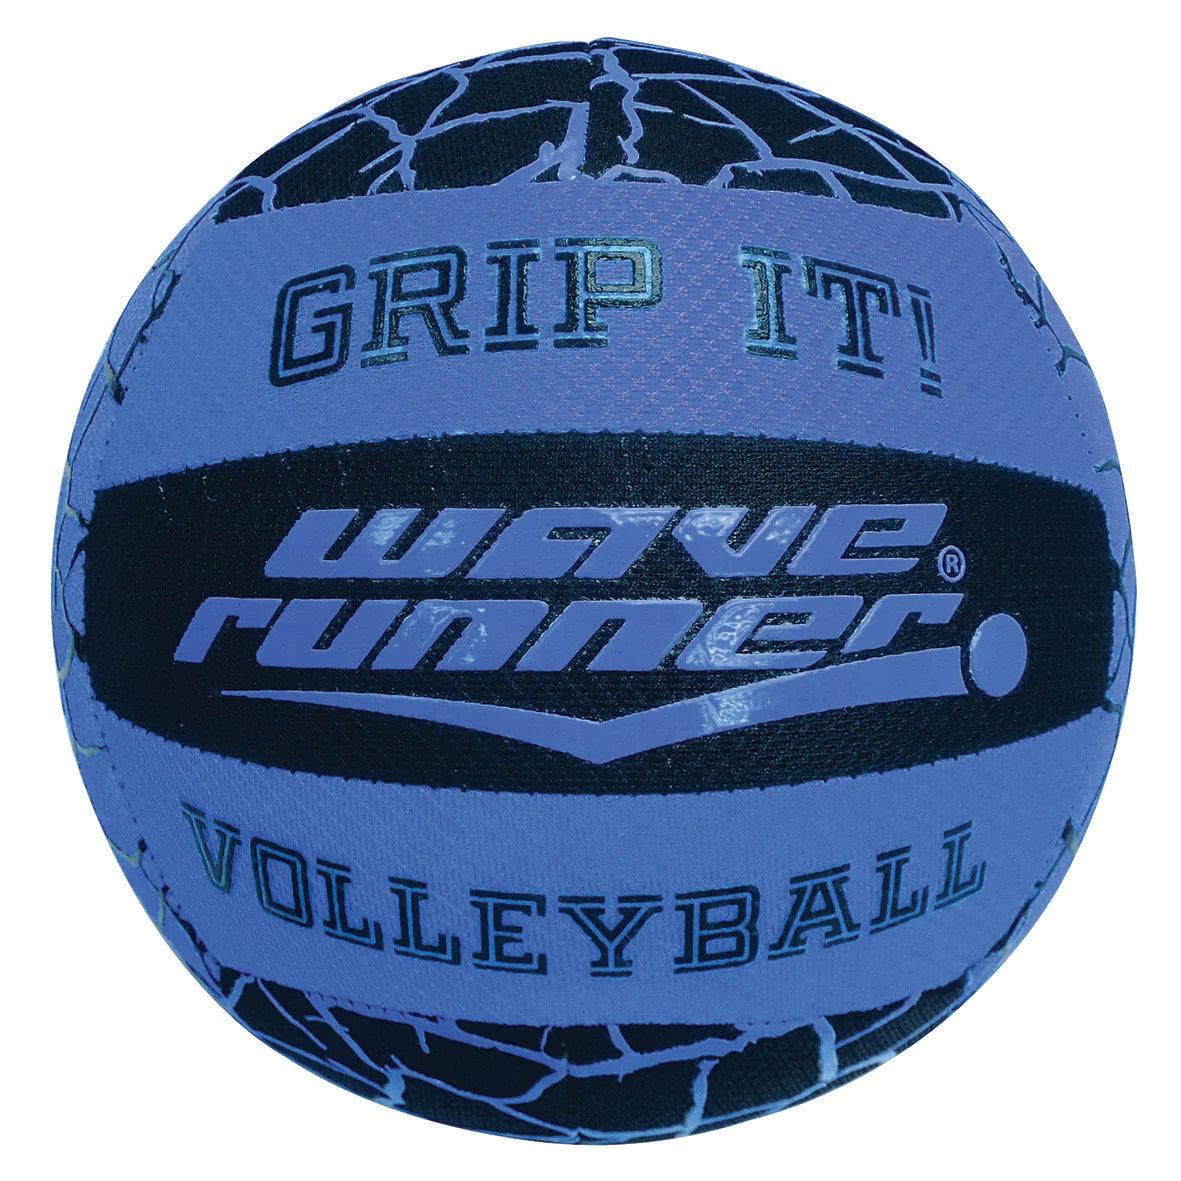 WAVE RUNNER GRIP IT VOLLEYBALL - Cottage Toys - Peterborough - Ontario - Canada